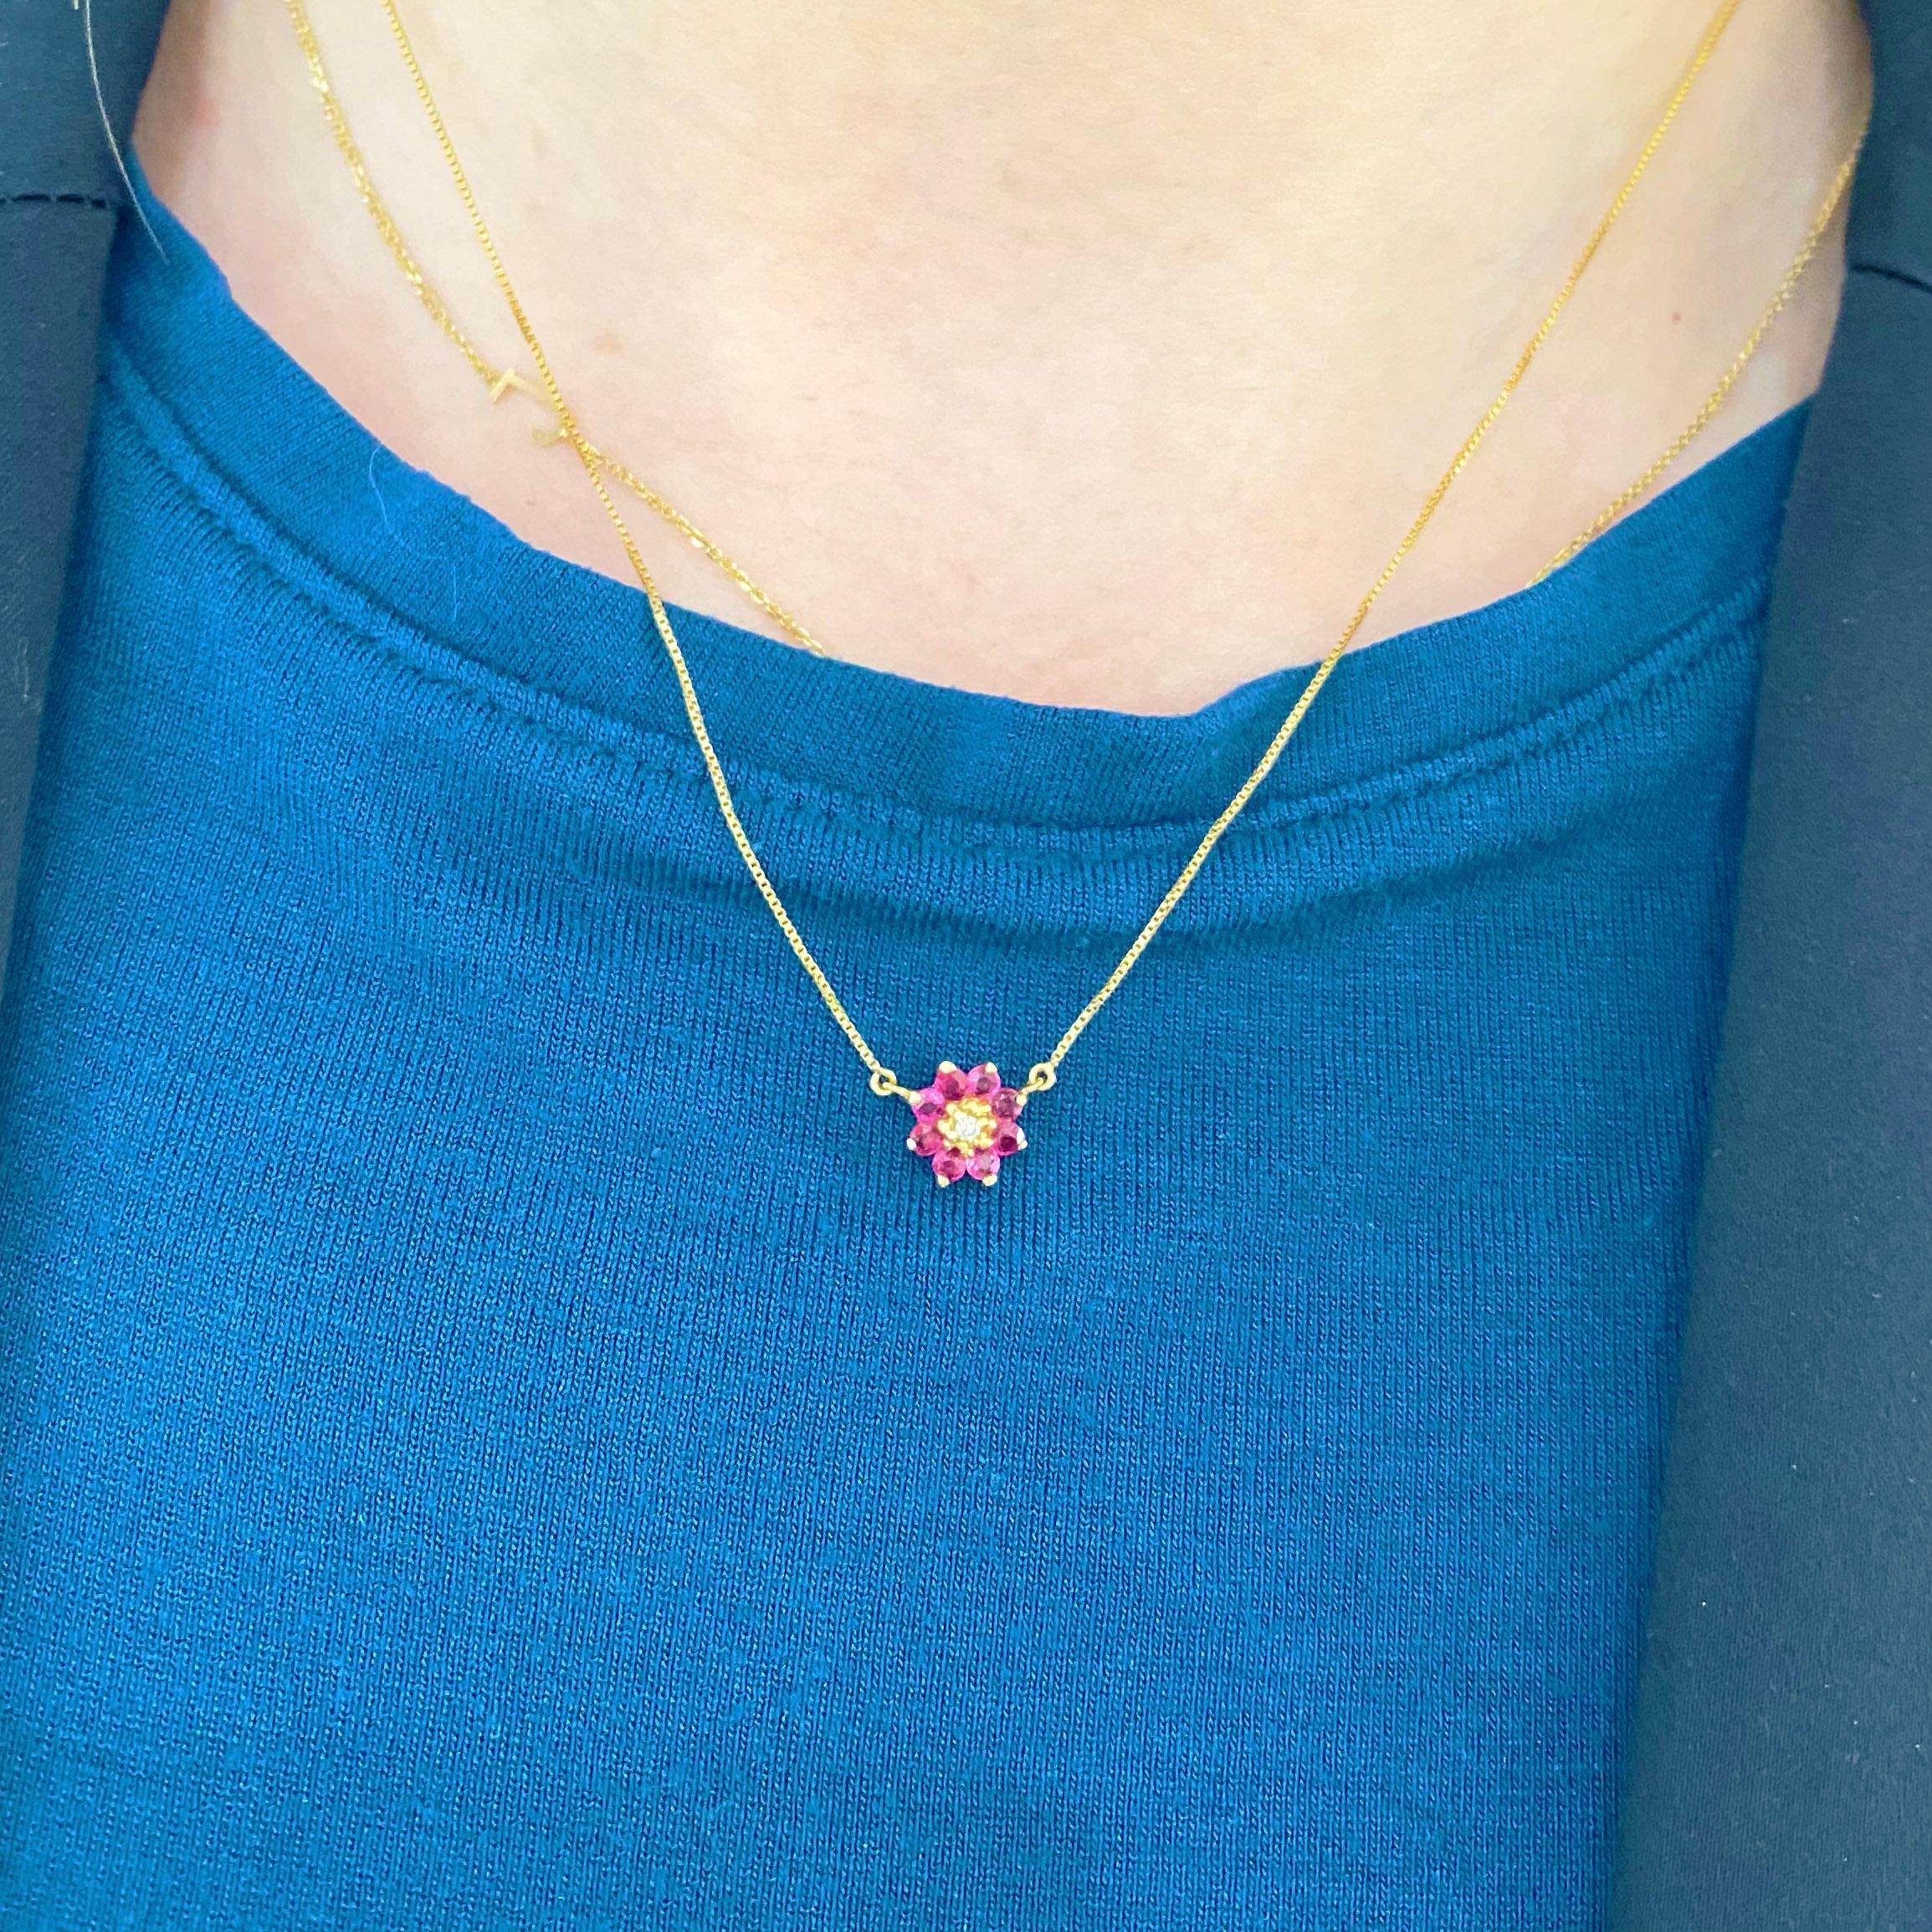 Gorgeous nine stone ruby and diamond flower pendant and chain! The necklace has 8 beautiful rubies encircling a round brilliant diamond, set in a gorgeous floral arrangement! The necklace goes with everything! Wear it on its own as a statement,